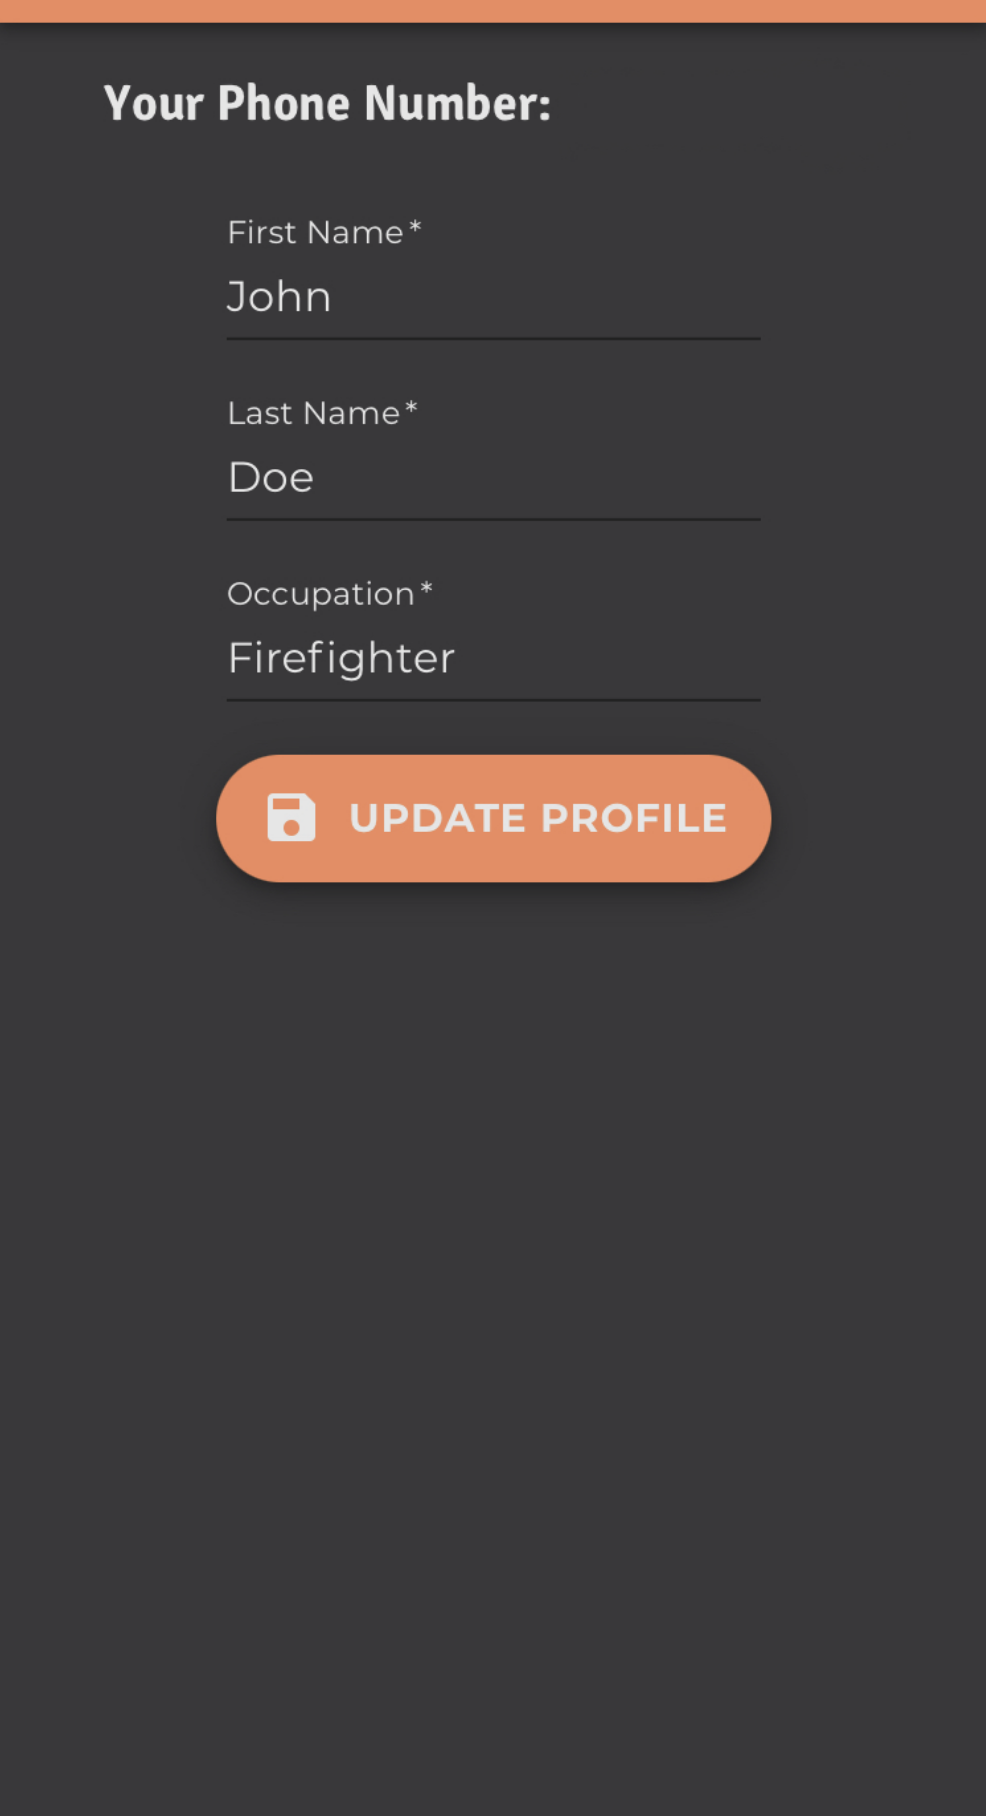 An image of an emergency responder's profile, where the phone number is listed and first name, last name, and occupation can be modified.